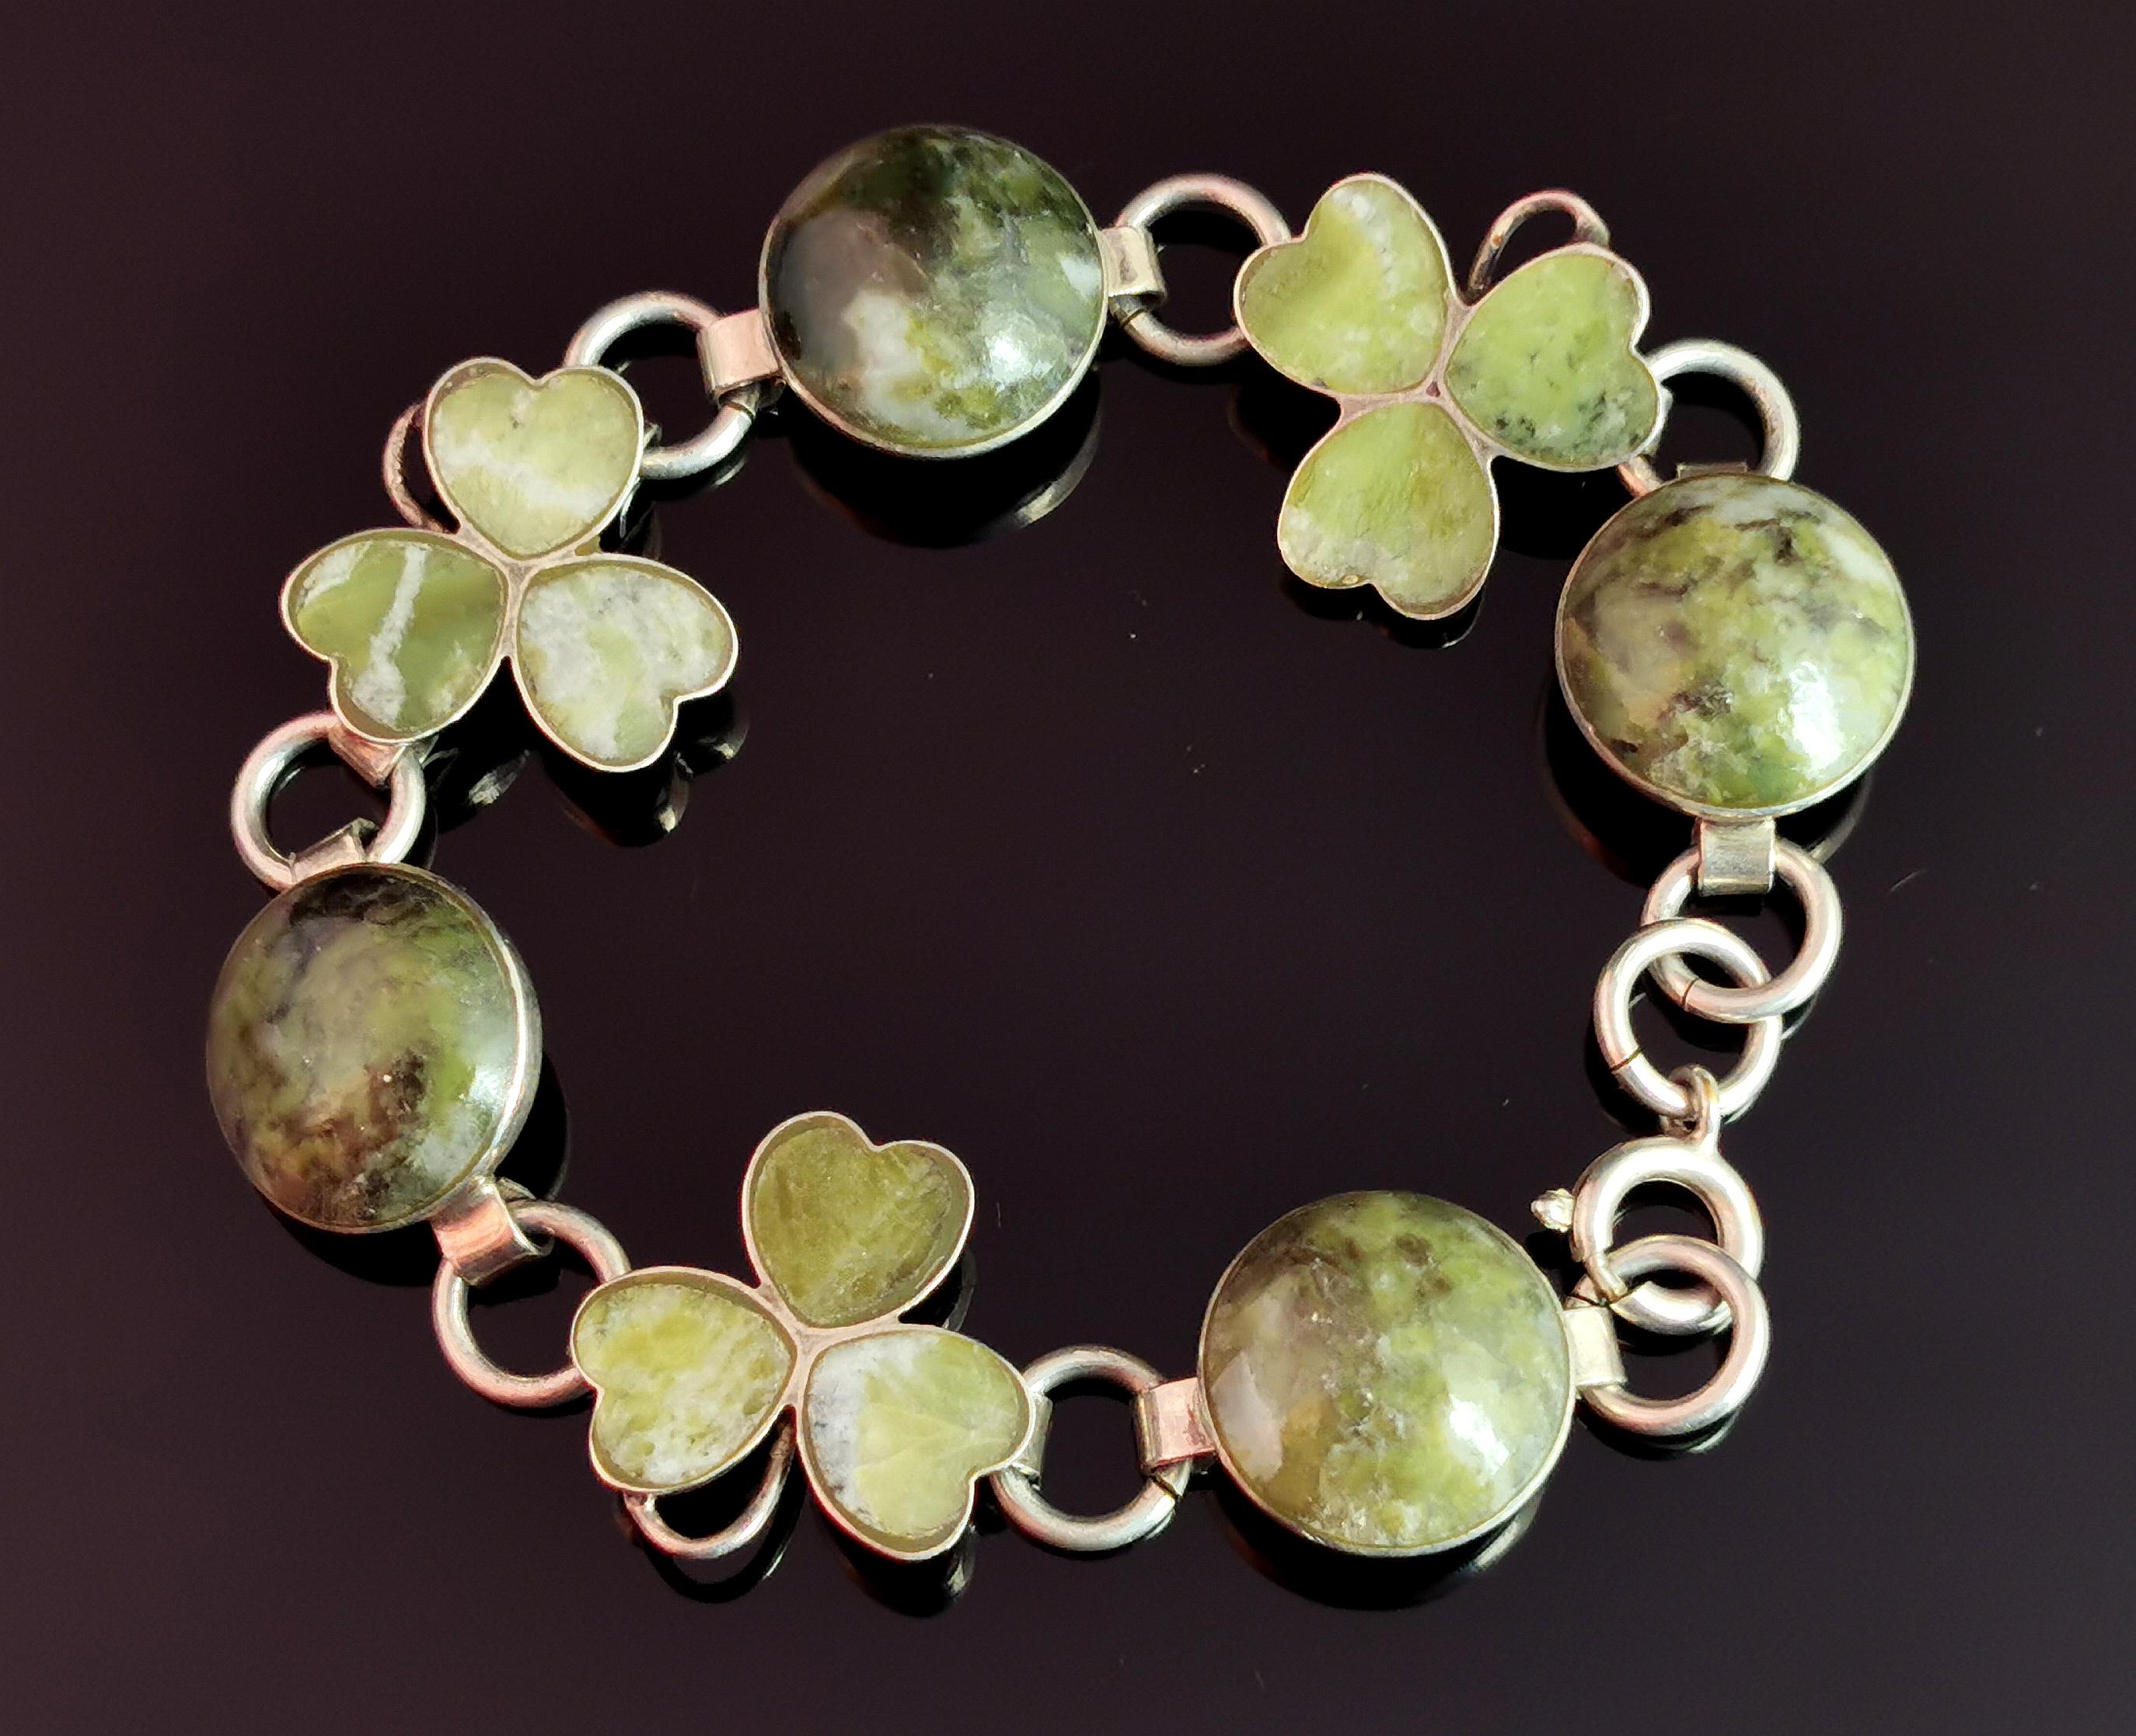 A gorgeous antique sterling silver and Connemara marble shamrock bracelet.

This is such a beautiful piece with stylised silver Shamrock or clover leaves, set with a rich green connemara marble, each marble leaf section shaped like heart.

The